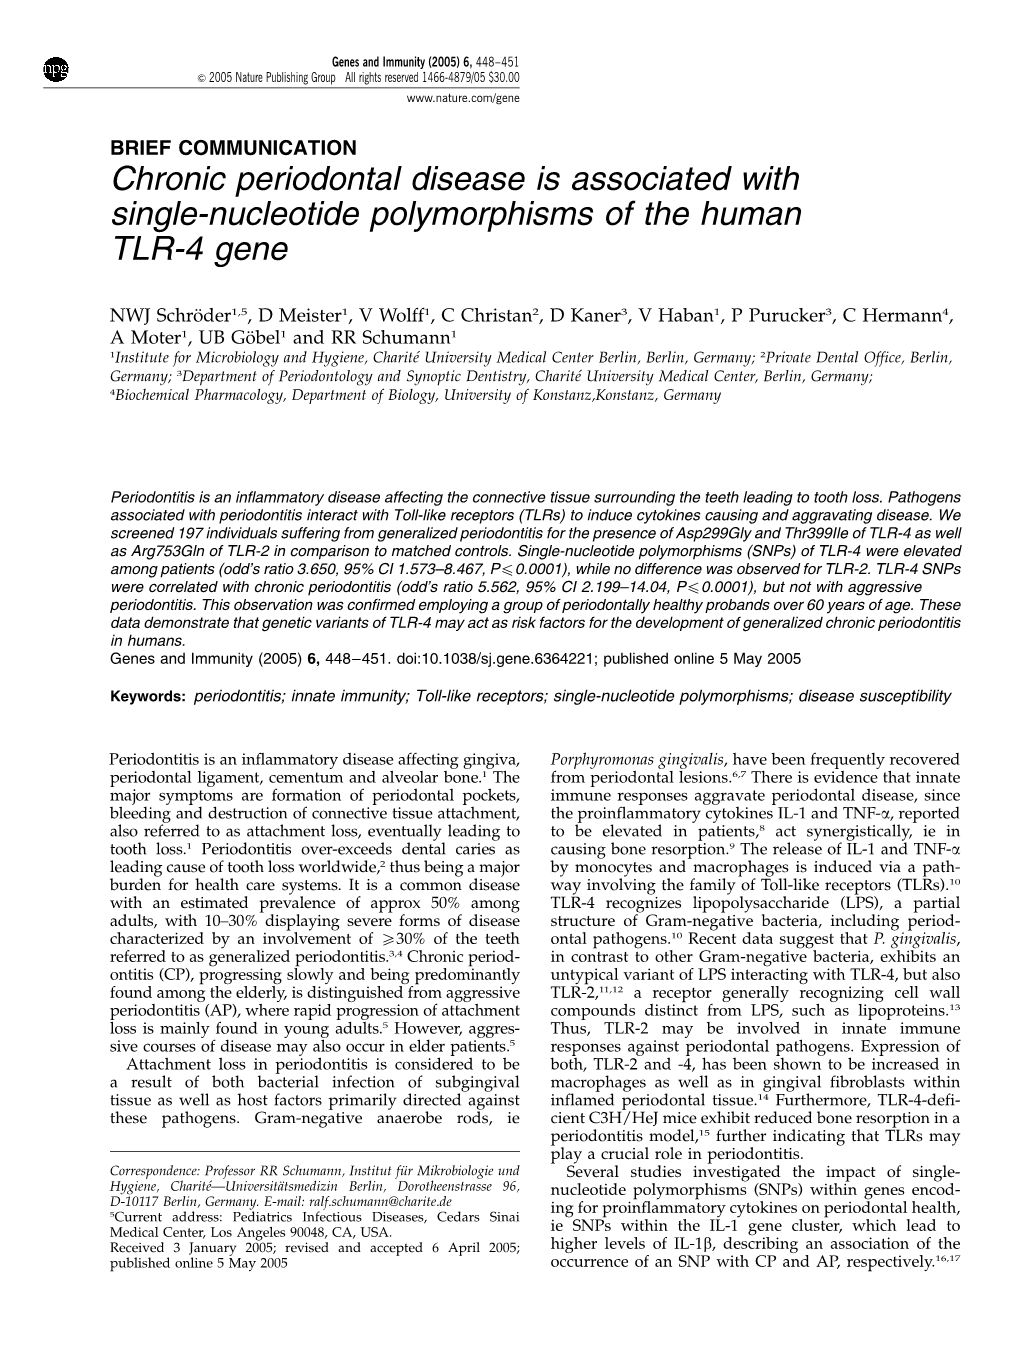 Chronic Periodontal Disease Is Associated with Single-Nucleotide Polymorphisms of the Human TLR-4 Gene